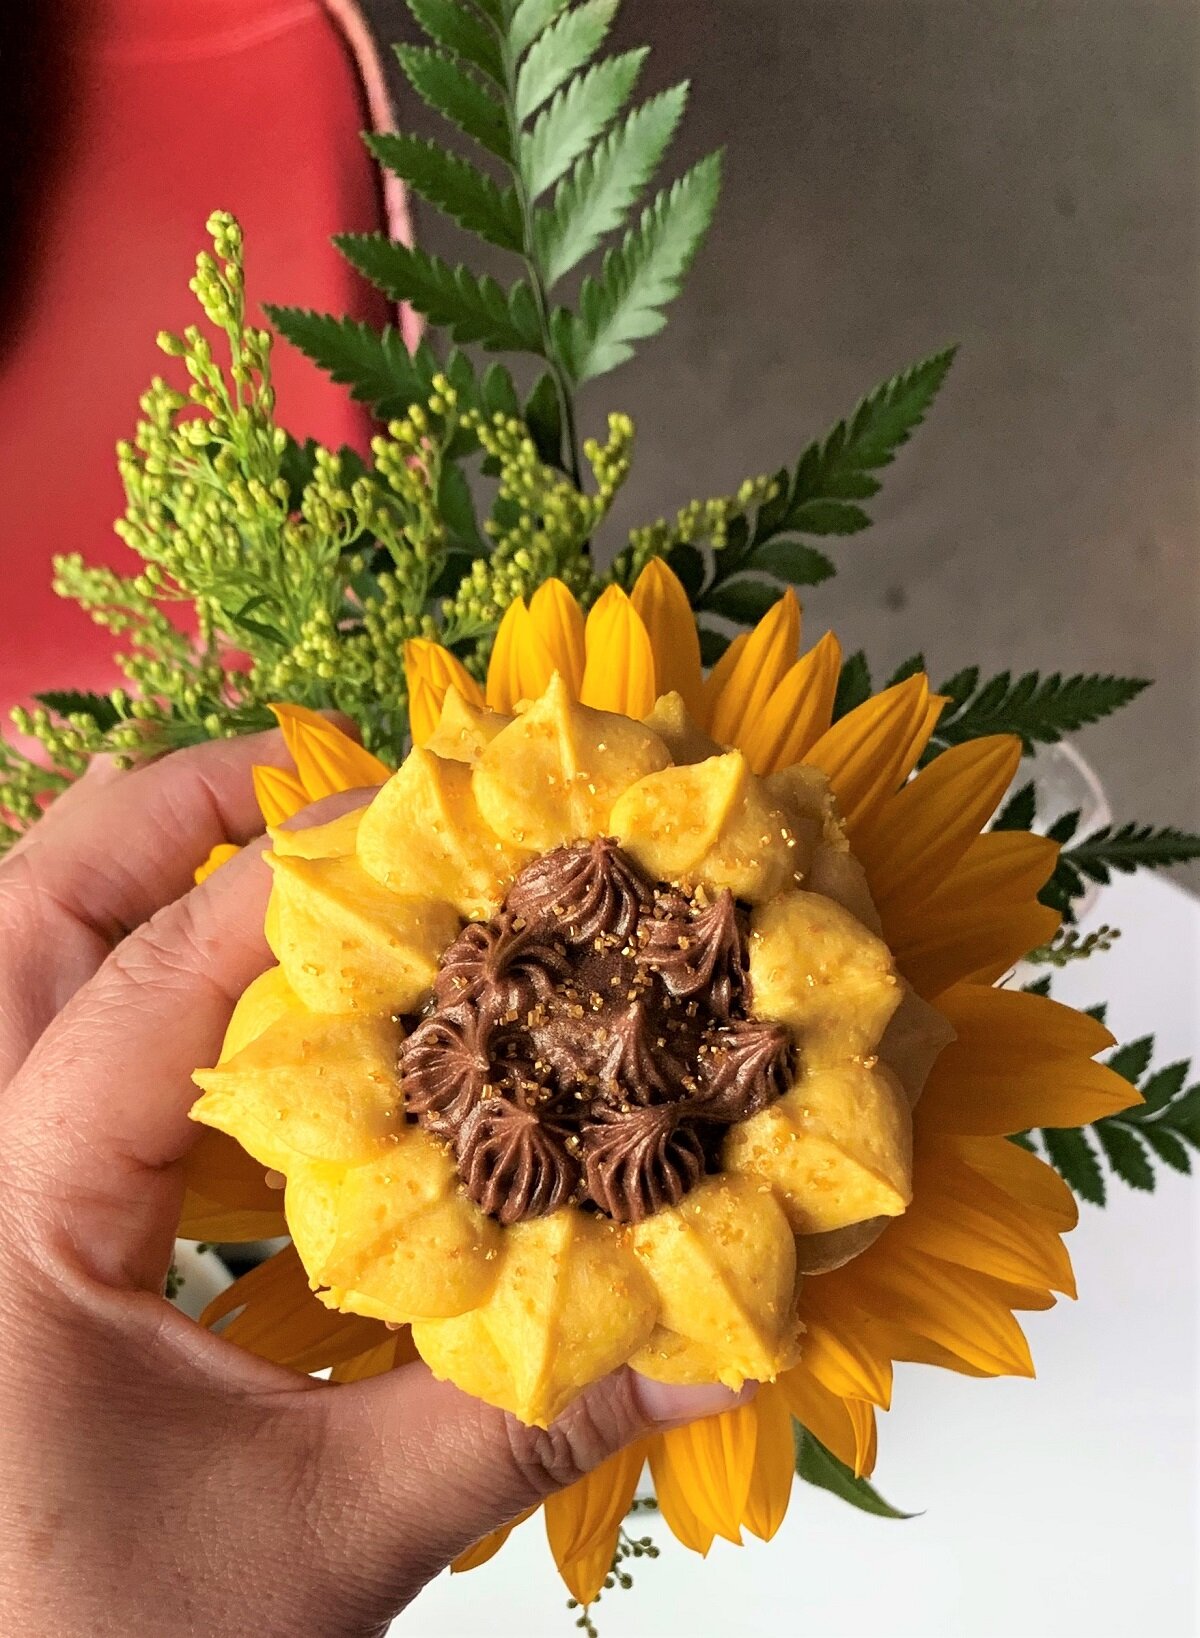 sunflower icing on a cupcake with a sunflower behind it